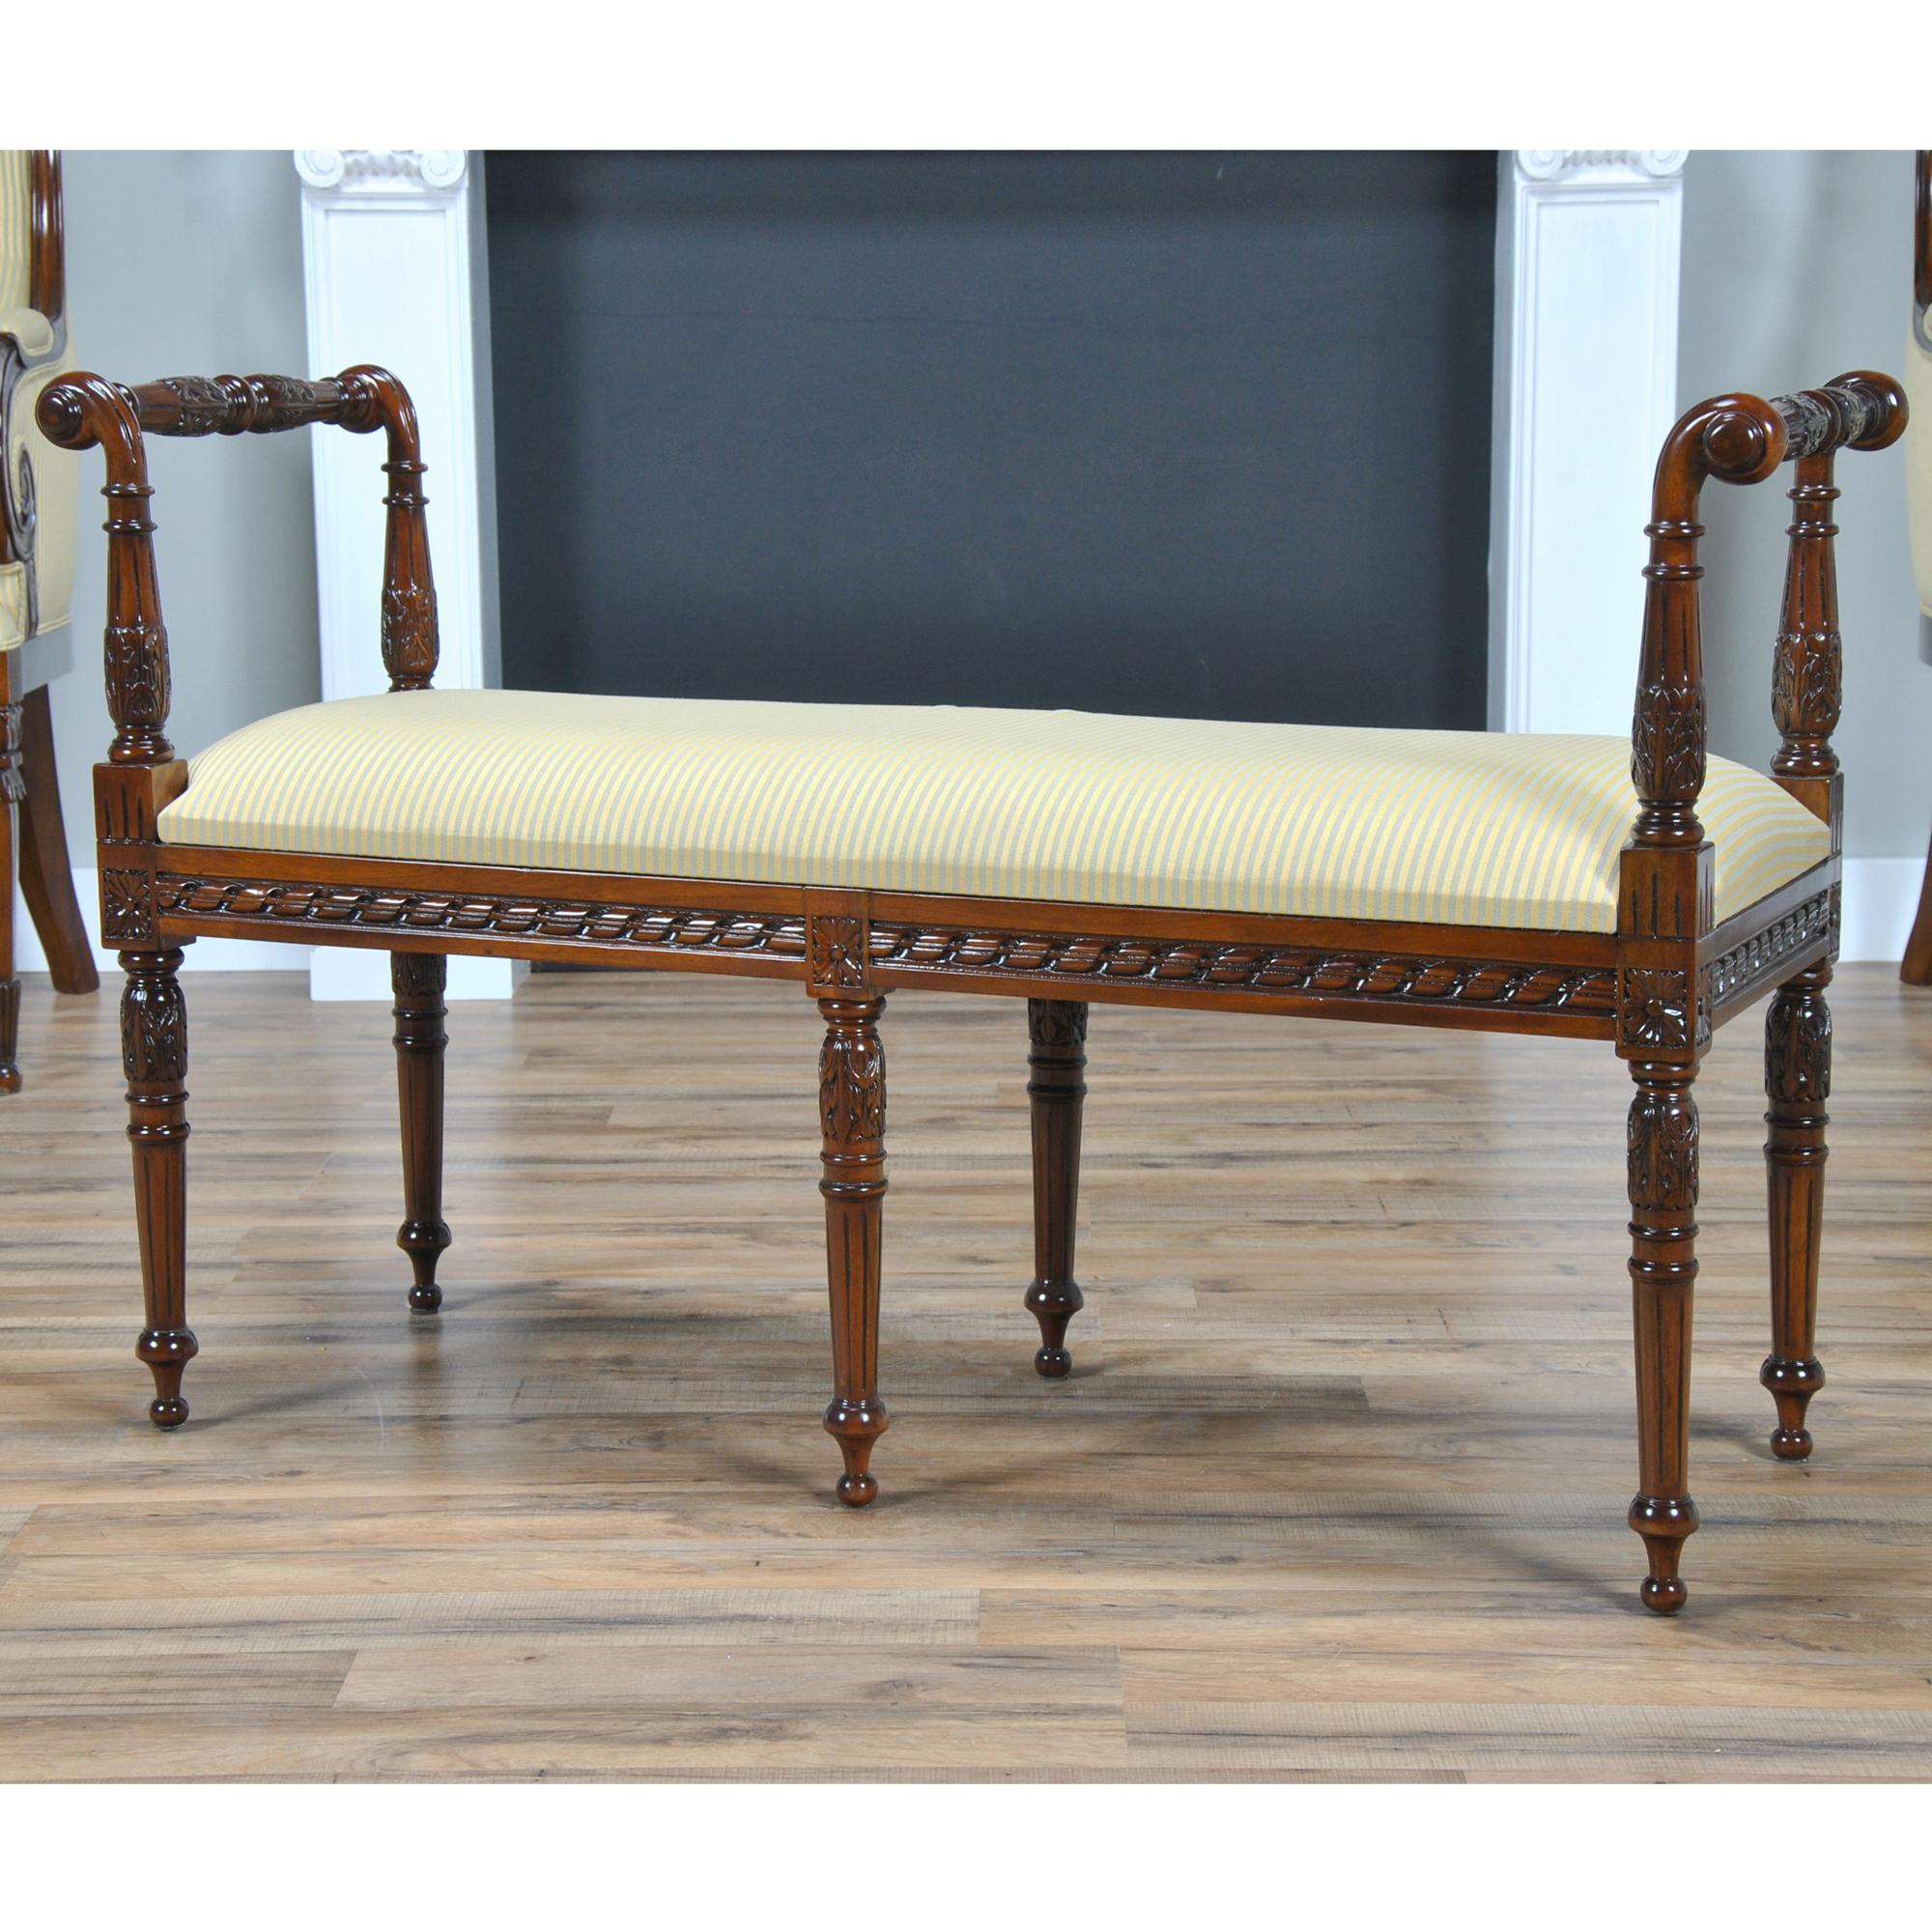 The French Window Bench by Niagara Furniture is lovely and elegant in design. Hand carved from solid mahogany the French Window Bench features beautiful details throughout as well as a neutral fabric. The six leg configuration helps keep the bench